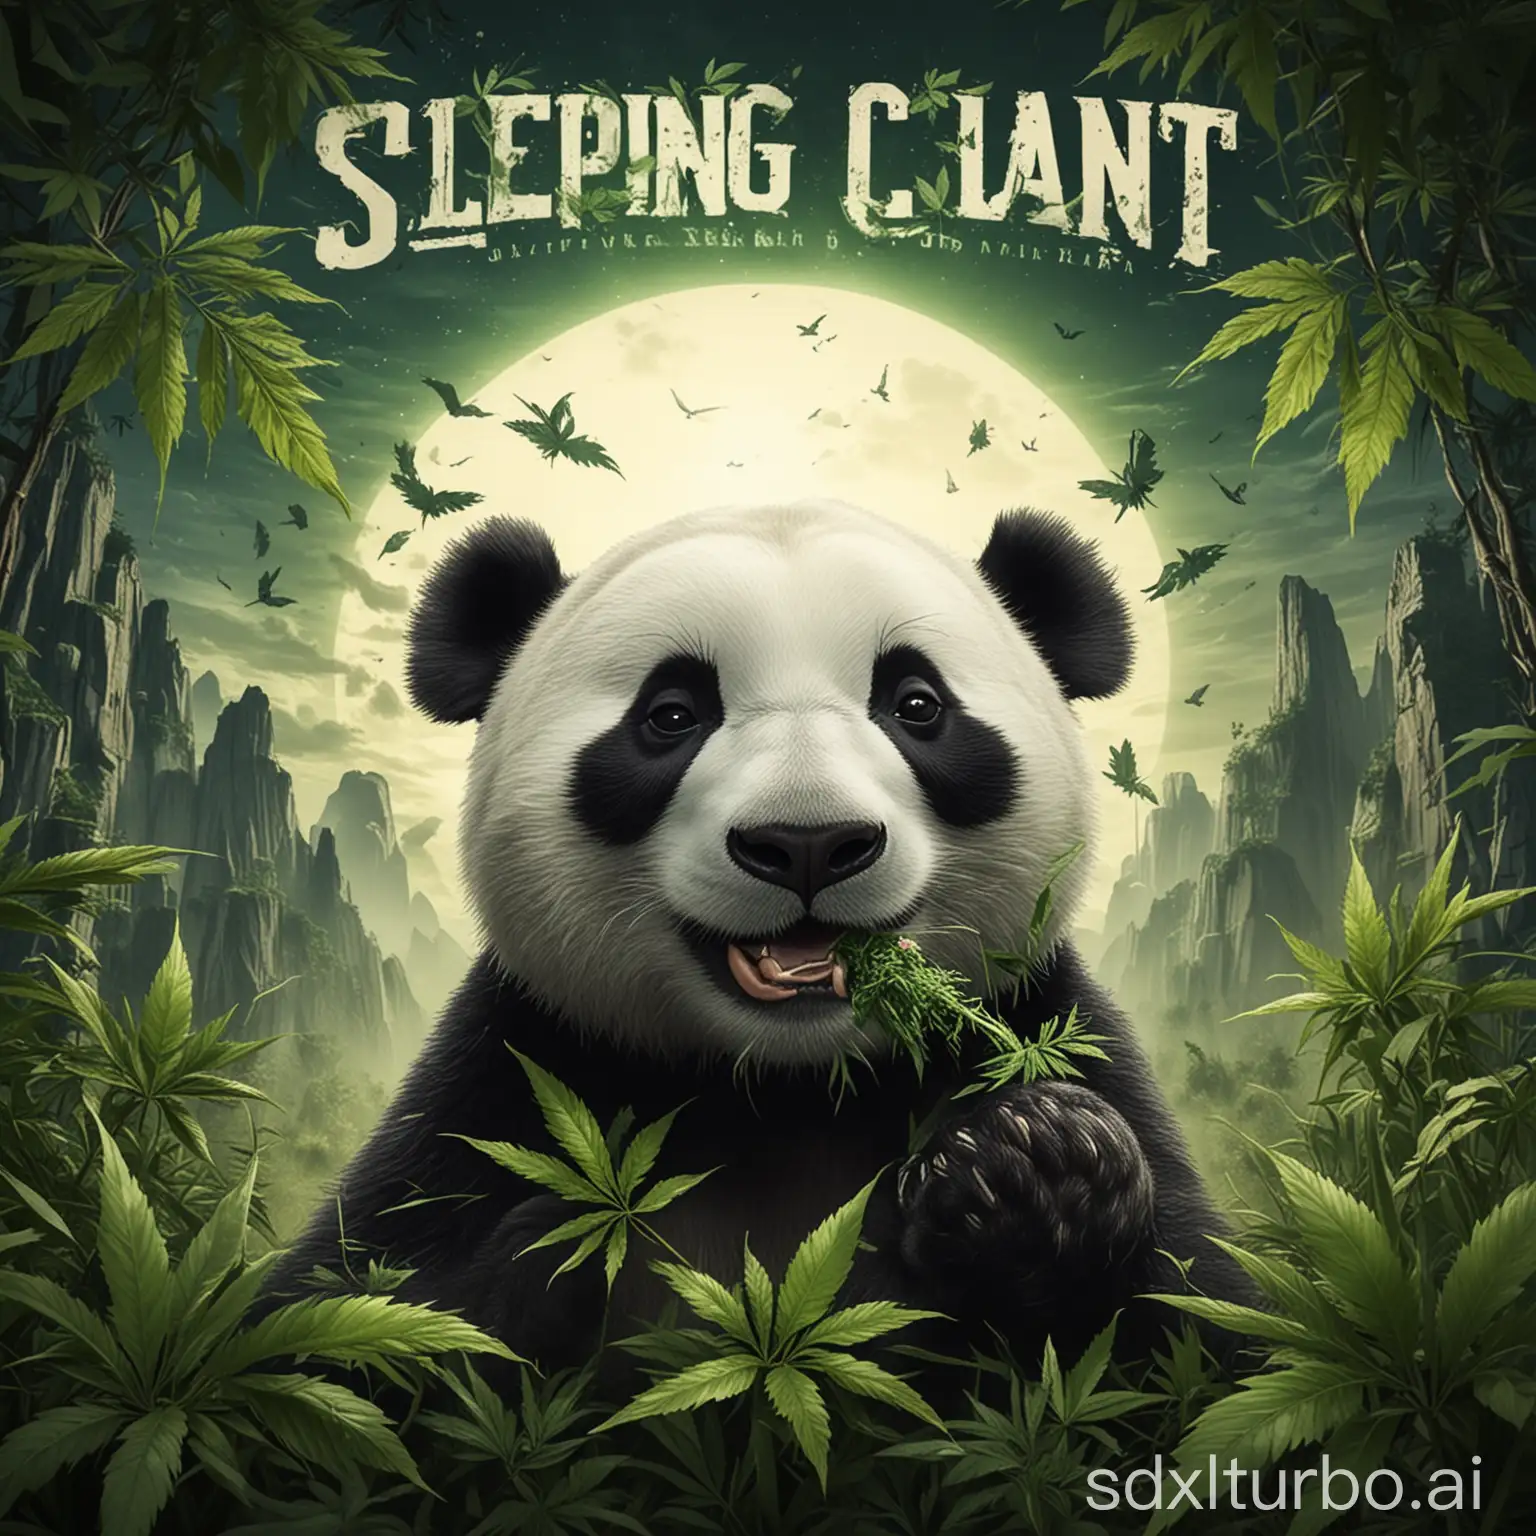 create a cover art for a music album tittle sleeping giant using a panda with weed leaf in its mouth to illustrate the tittle